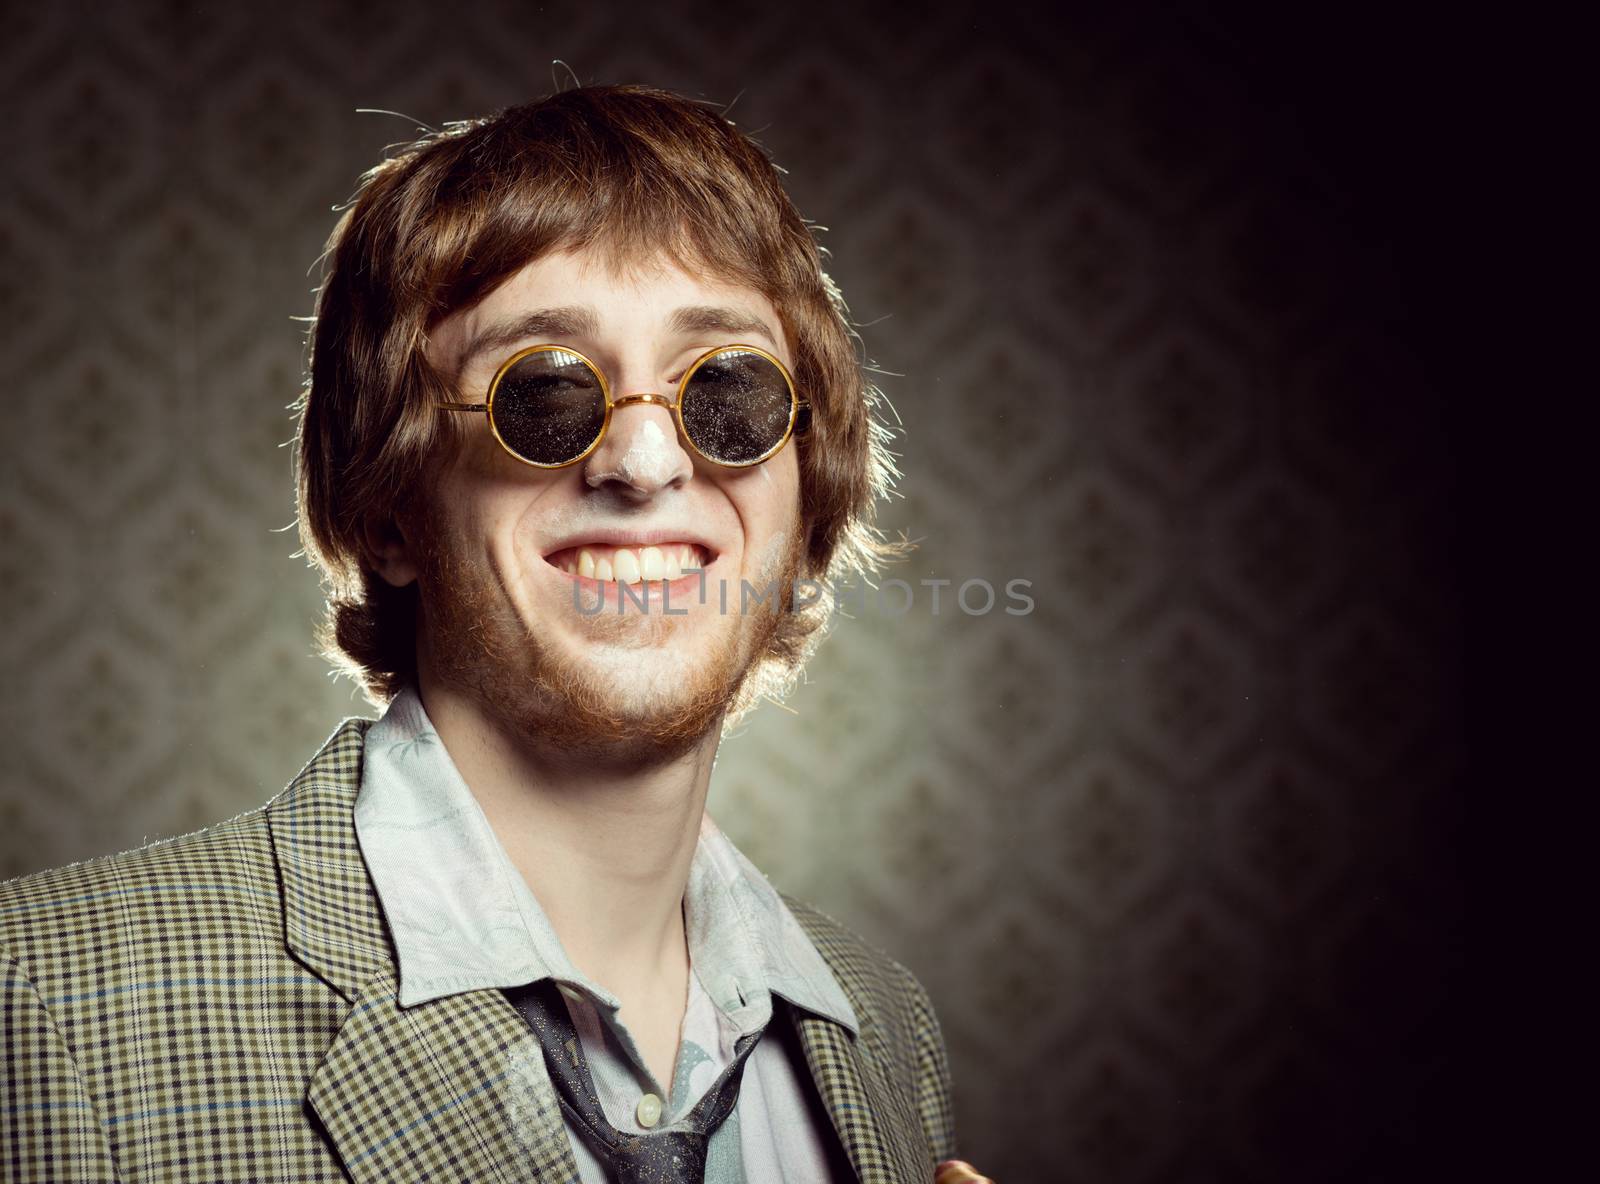 Funny 1960s style guy after snorting cocaine on vintage wallpaper background.